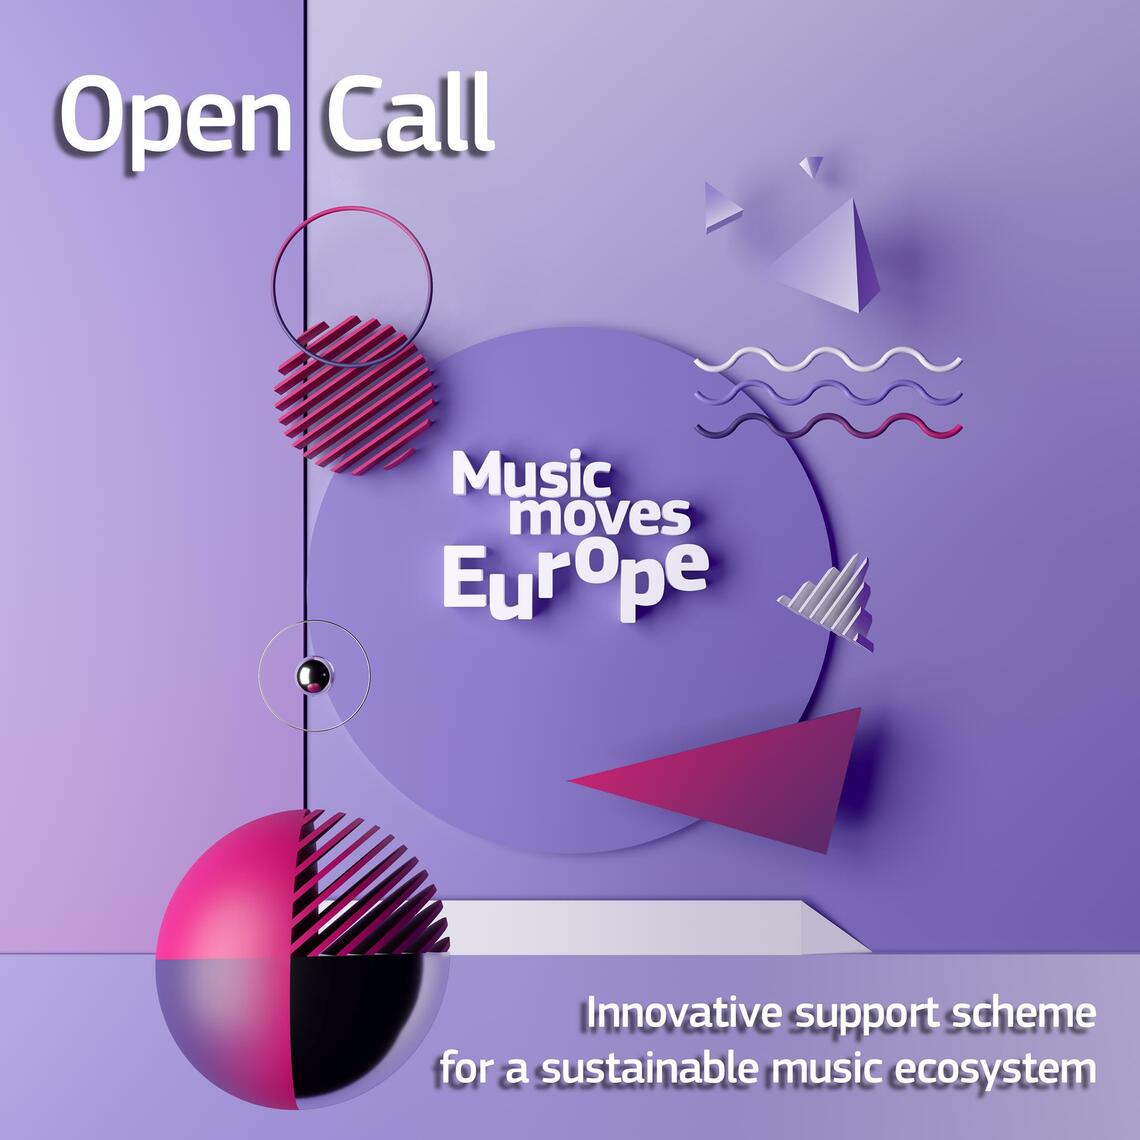 20-07-10 MME Innovative support scheme sustainable music ecosystem